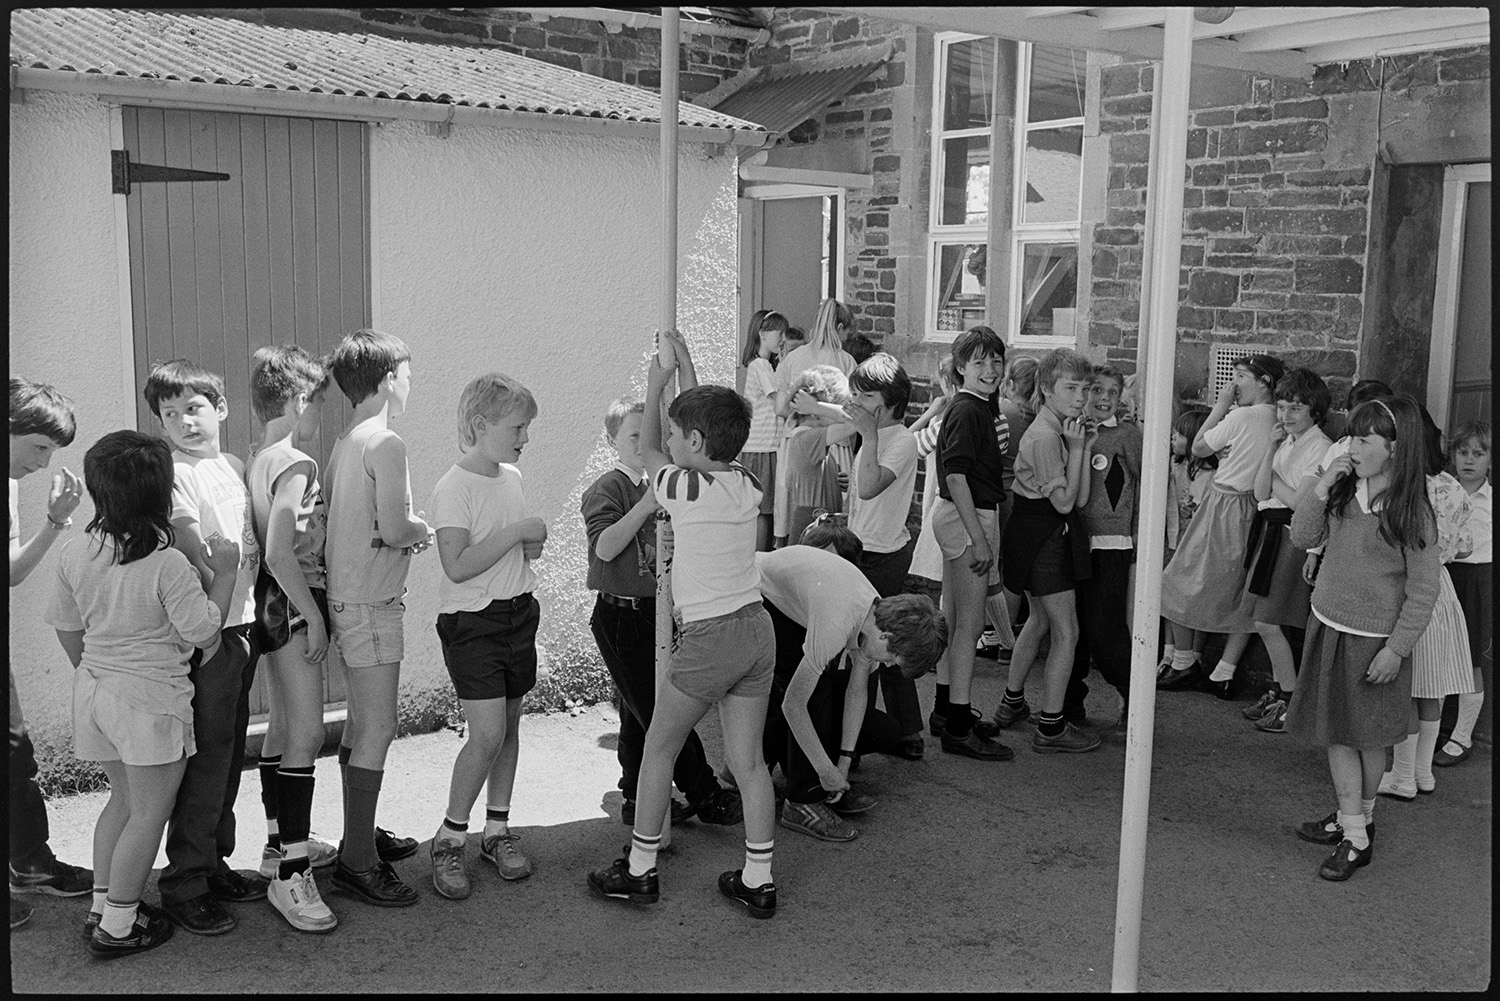 Primary school day. Teachers and pupils. Catering women making and serving lunch. Line up in yard.
[Children lining up in the playground and waiting near the doorway, possibly to the canteen, at Chulmleigh Primary School.]